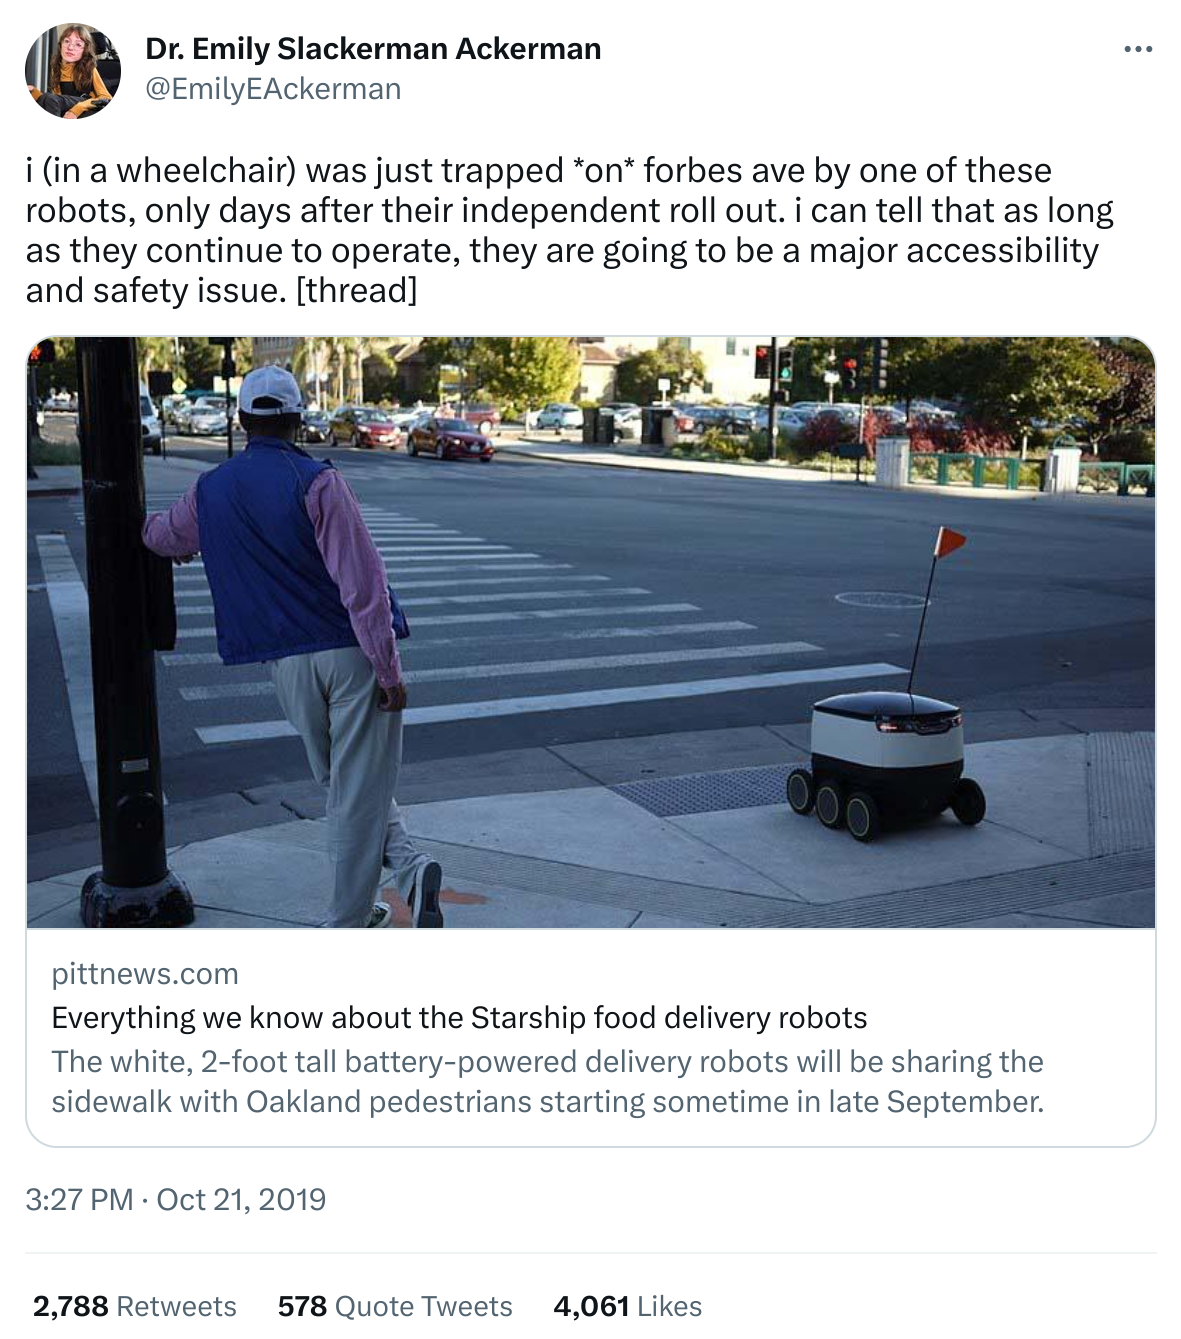 Screenshot of a twitter message reading "i (in a wheelchair) was just trapped *on* forbes ave by one of these robots, only days after their independent roll out. i can tell that as long as they continue to operate, they are going to be a major accessibility and safety issue." A photo below the text shows a small sidewalk delivery robot next to a person waiting at a crosswalk.